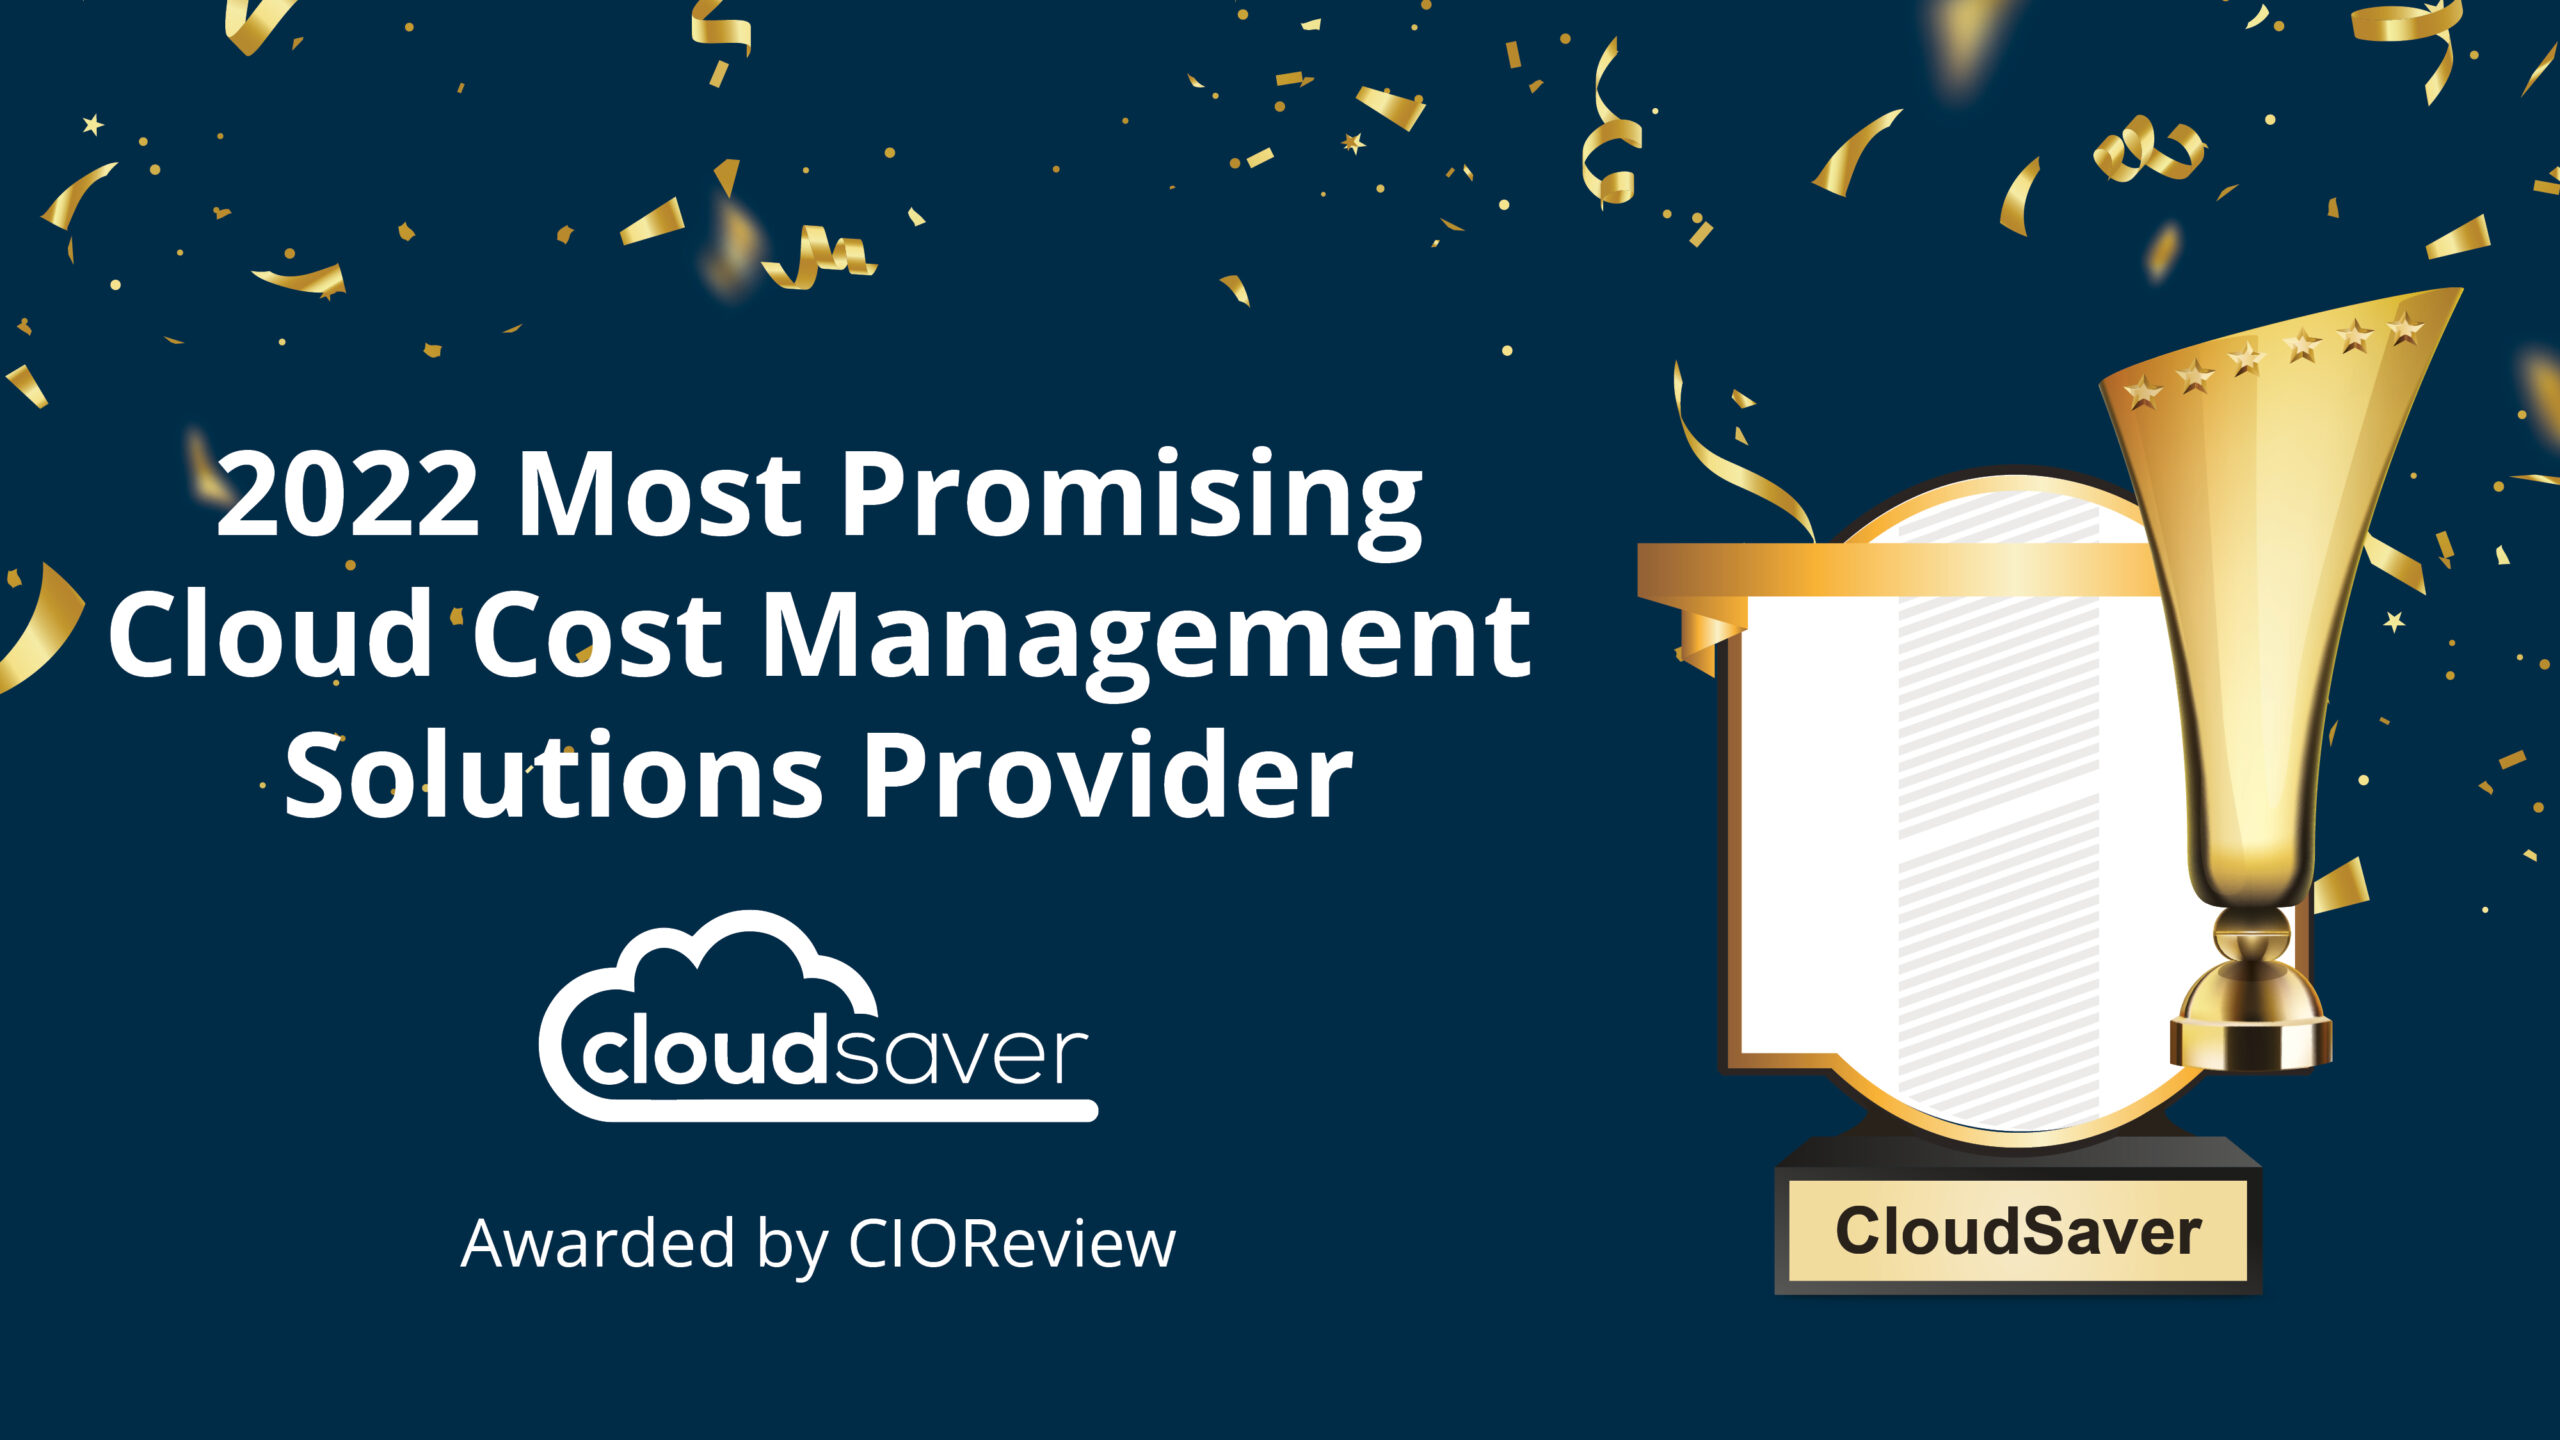 The Most Promising Cloud Cost Management Solutions Provider of 2022